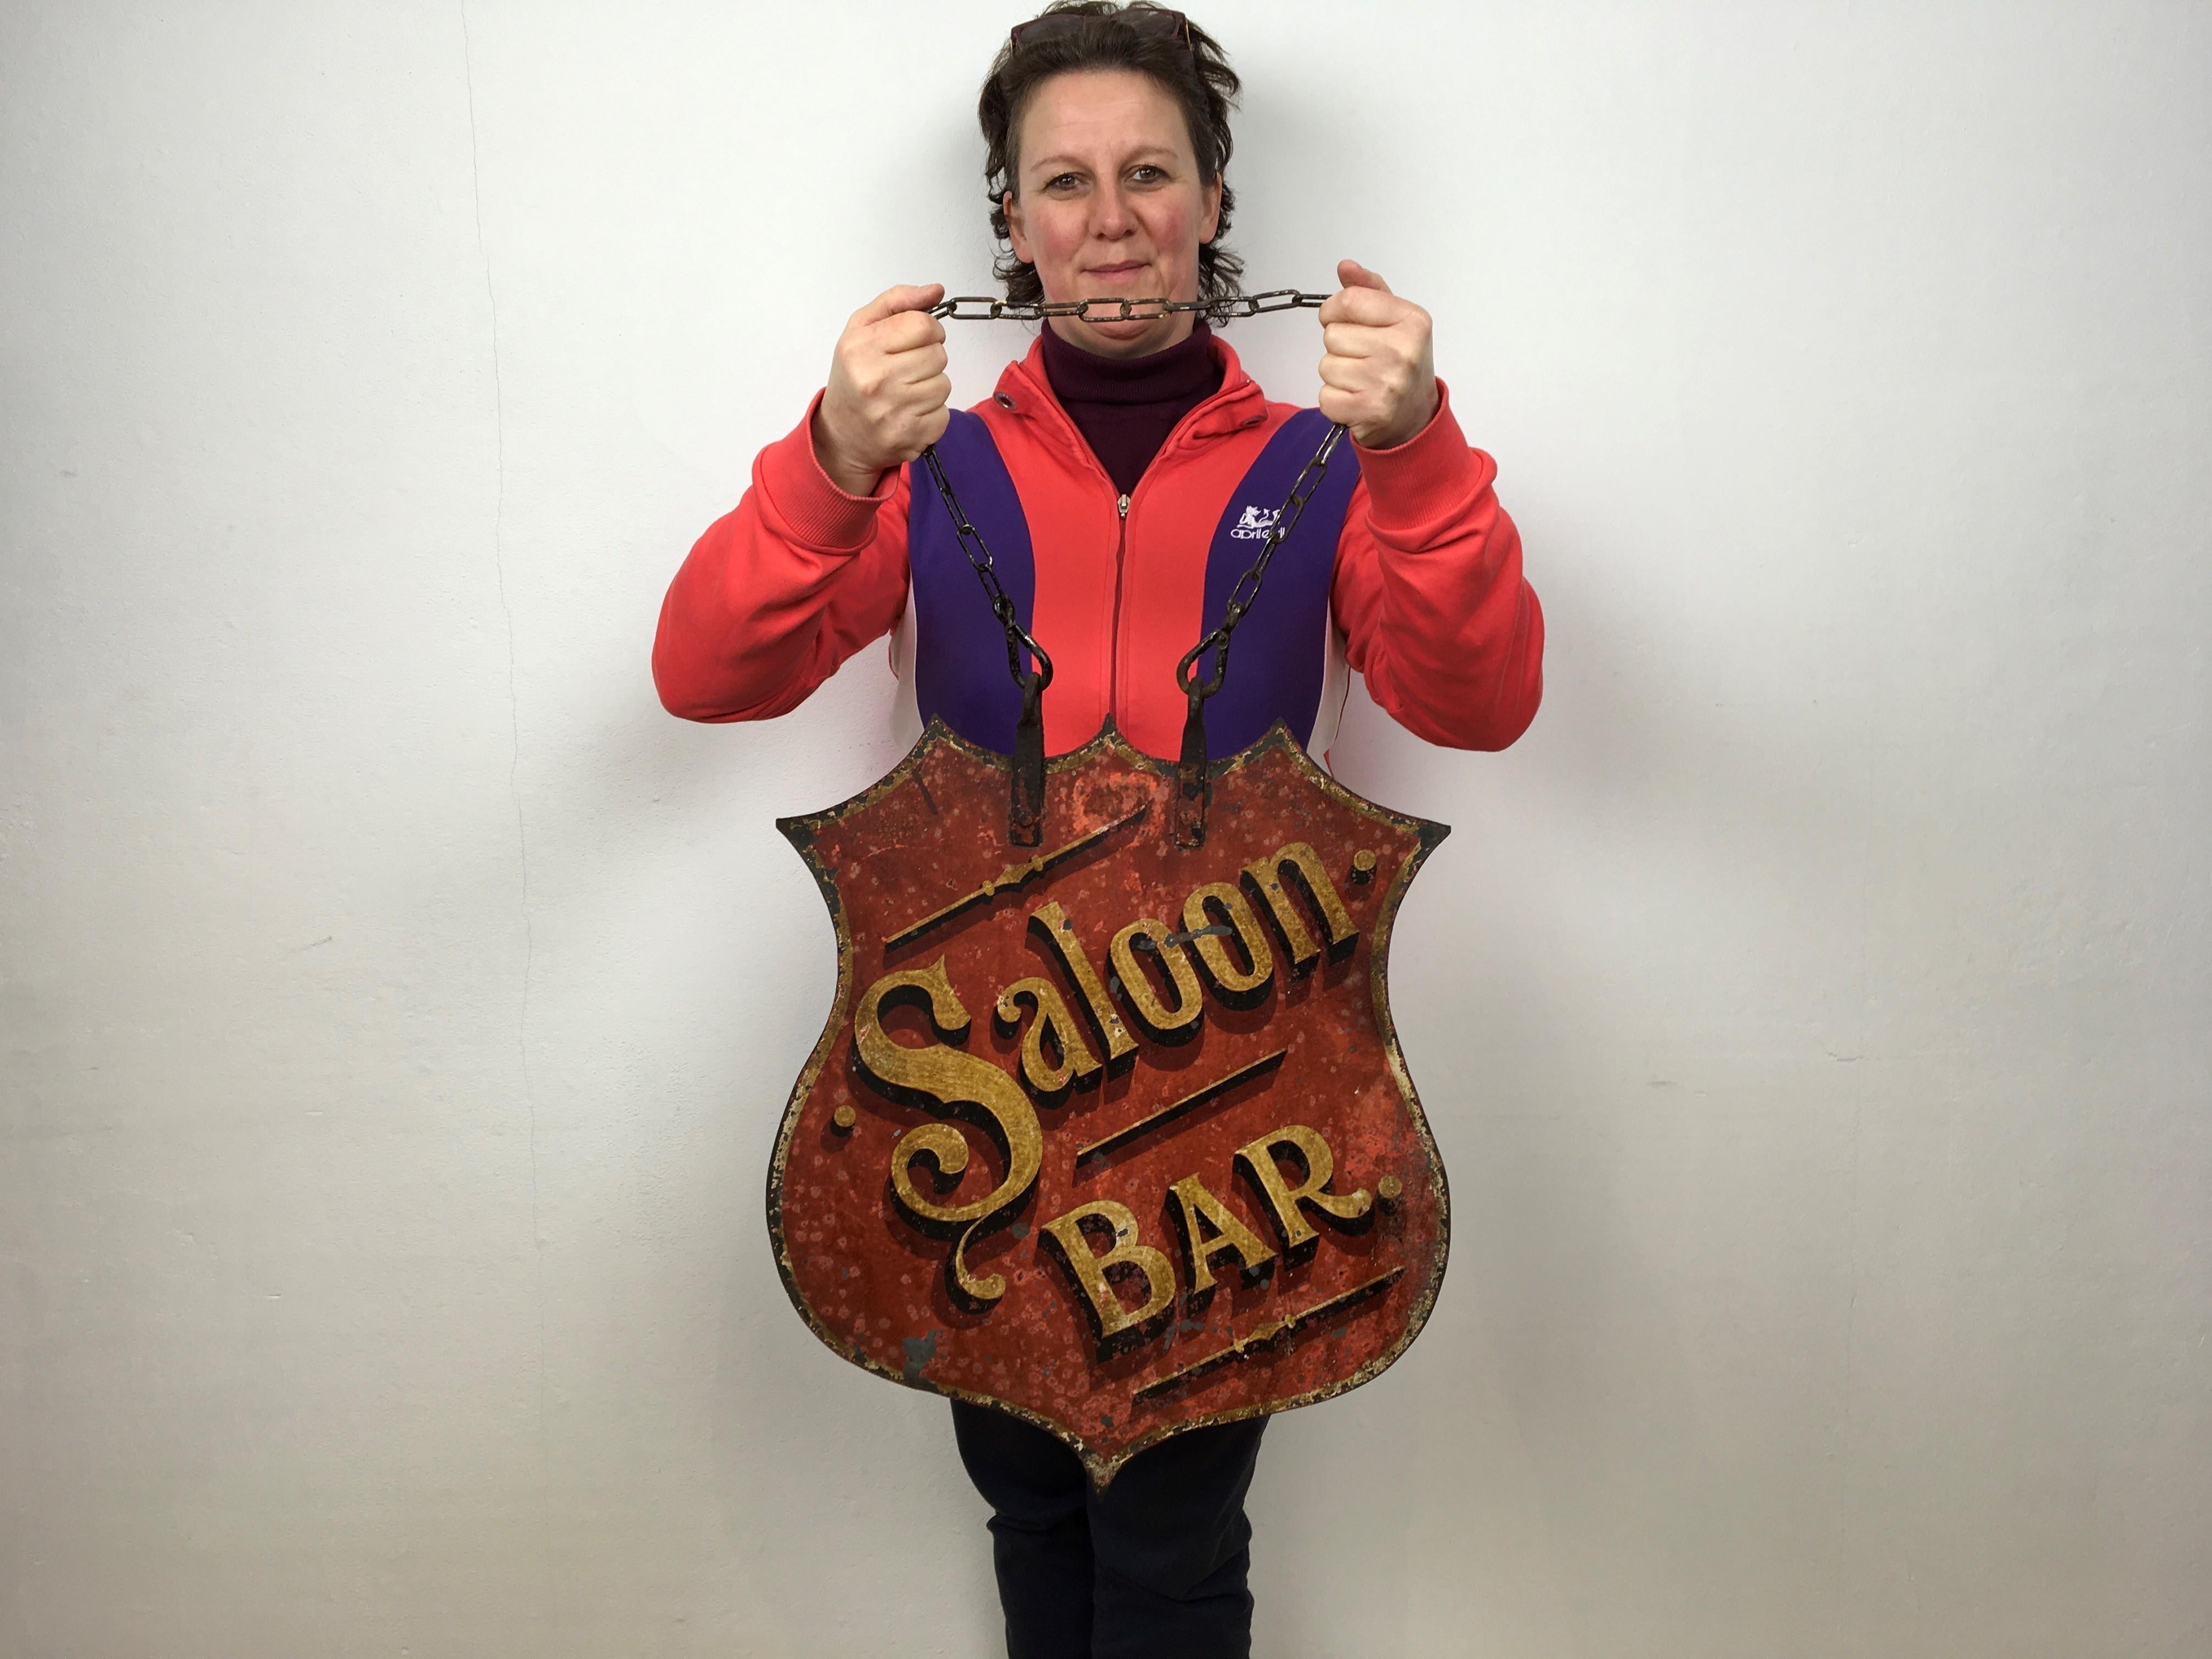 Antique saloon bar pub sign. 
This hand-crafted red saloon bar sign with chain, will look great in your mancave, 
pub, homebar etc.
Can be hung at the wall, on the ceiling etc.
Great looking old sign - antique sign - signboard with lots of charm